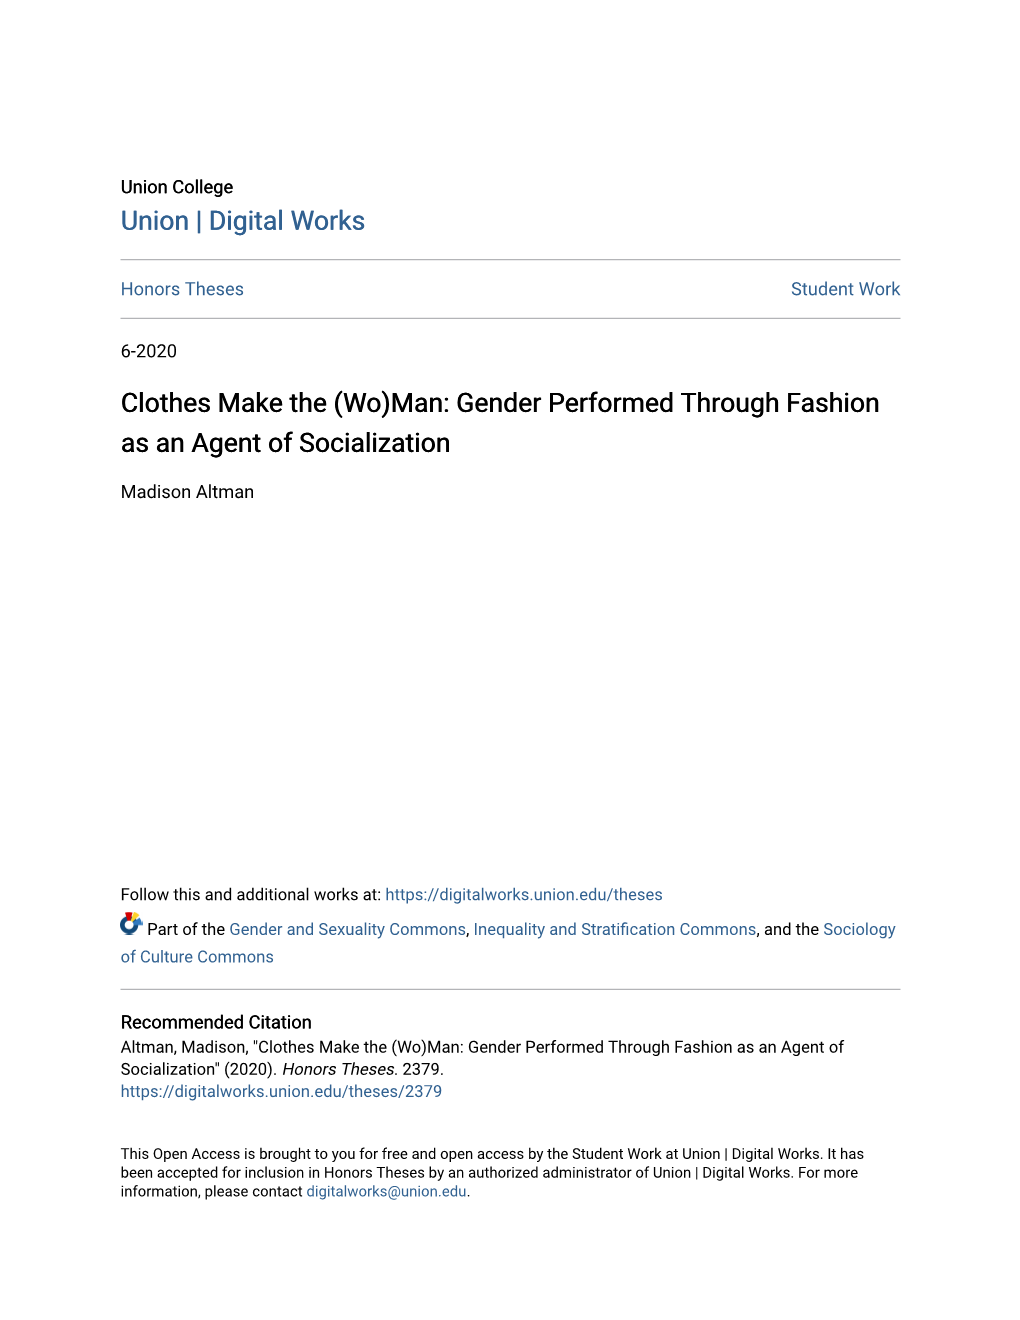 Man: Gender Performed Through Fashion As an Agent of Socialization